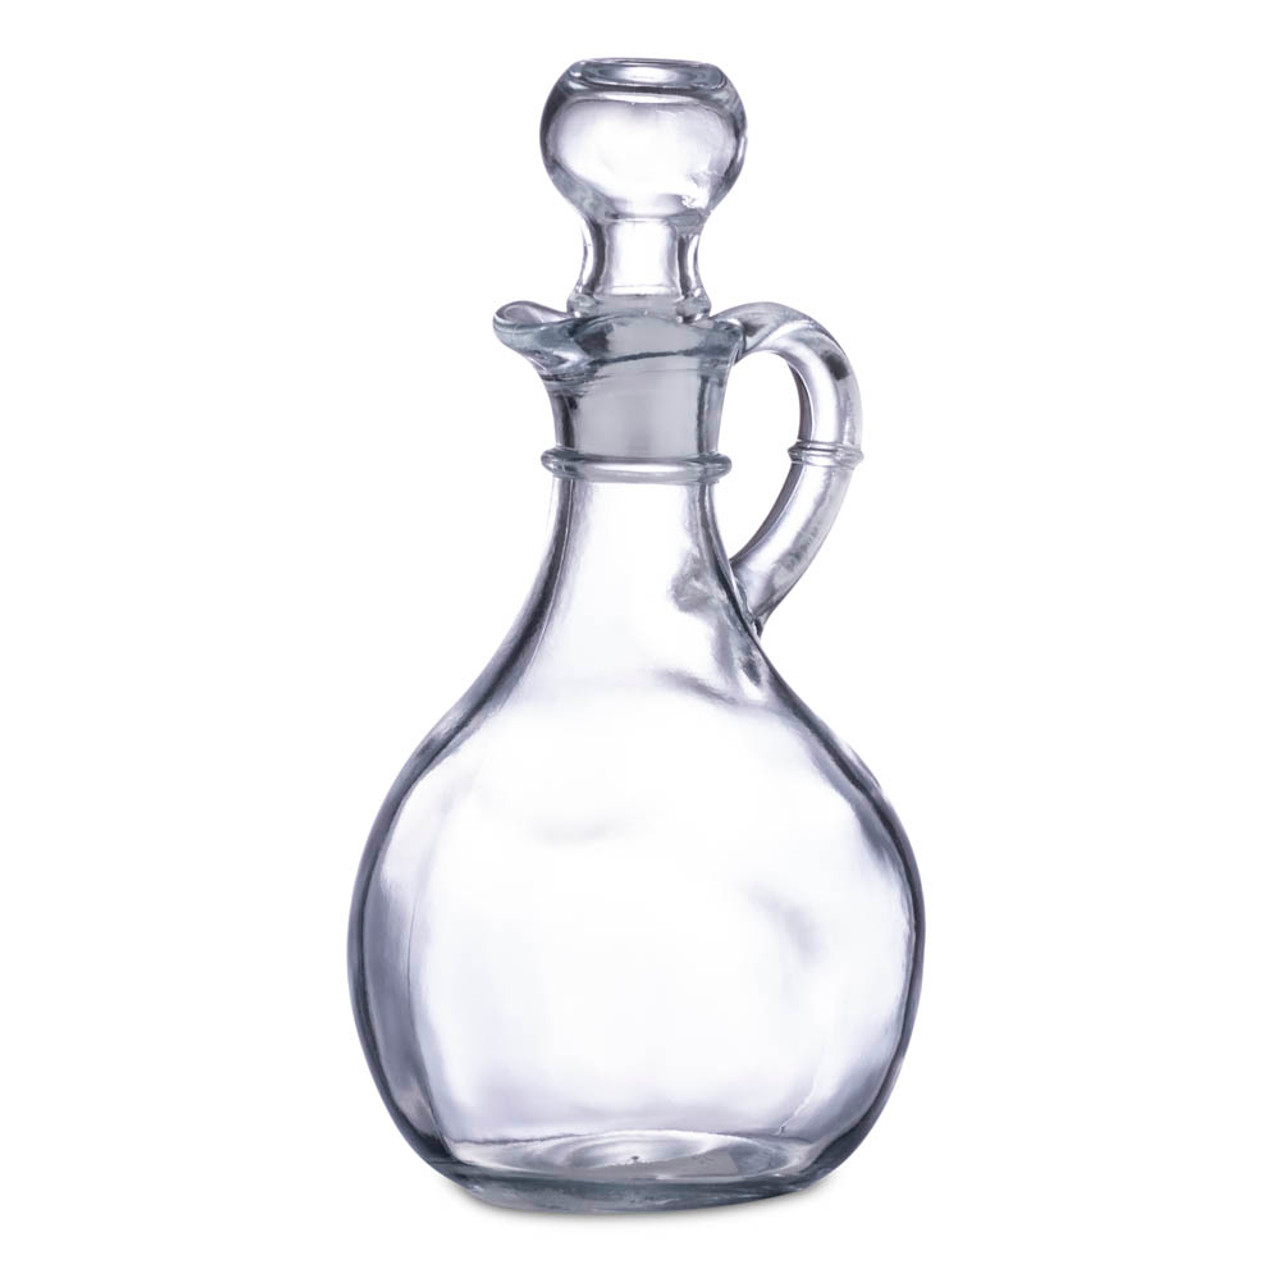 https://cdn11.bigcommerce.com/s-cznxq08r7/images/stencil/1280x1280/products/1813/3618/980r-bitter-glass_cocktail_bitters_bar_syrup_bottle_with_stopper_-_10_oz_-_1__74169.1590768750.jpg?c=1